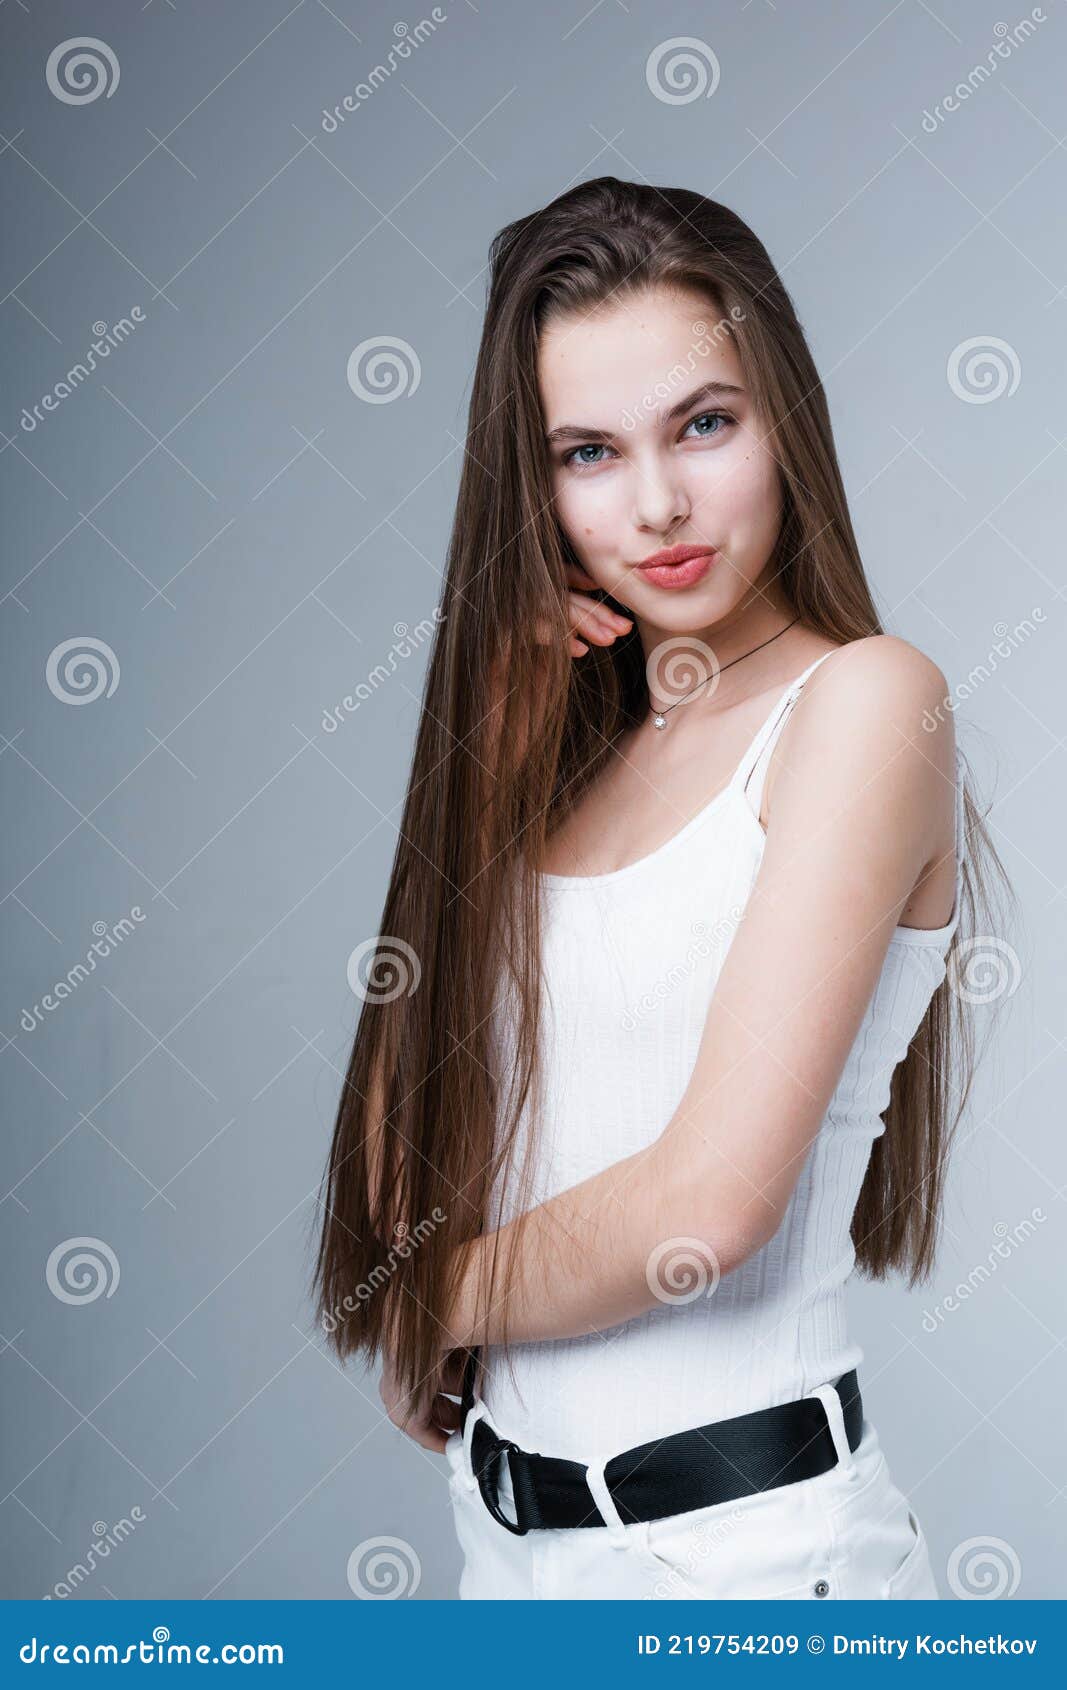 attractive young girl in a white tank top and trousers with long shiny hair stands sideways and looks at the camera